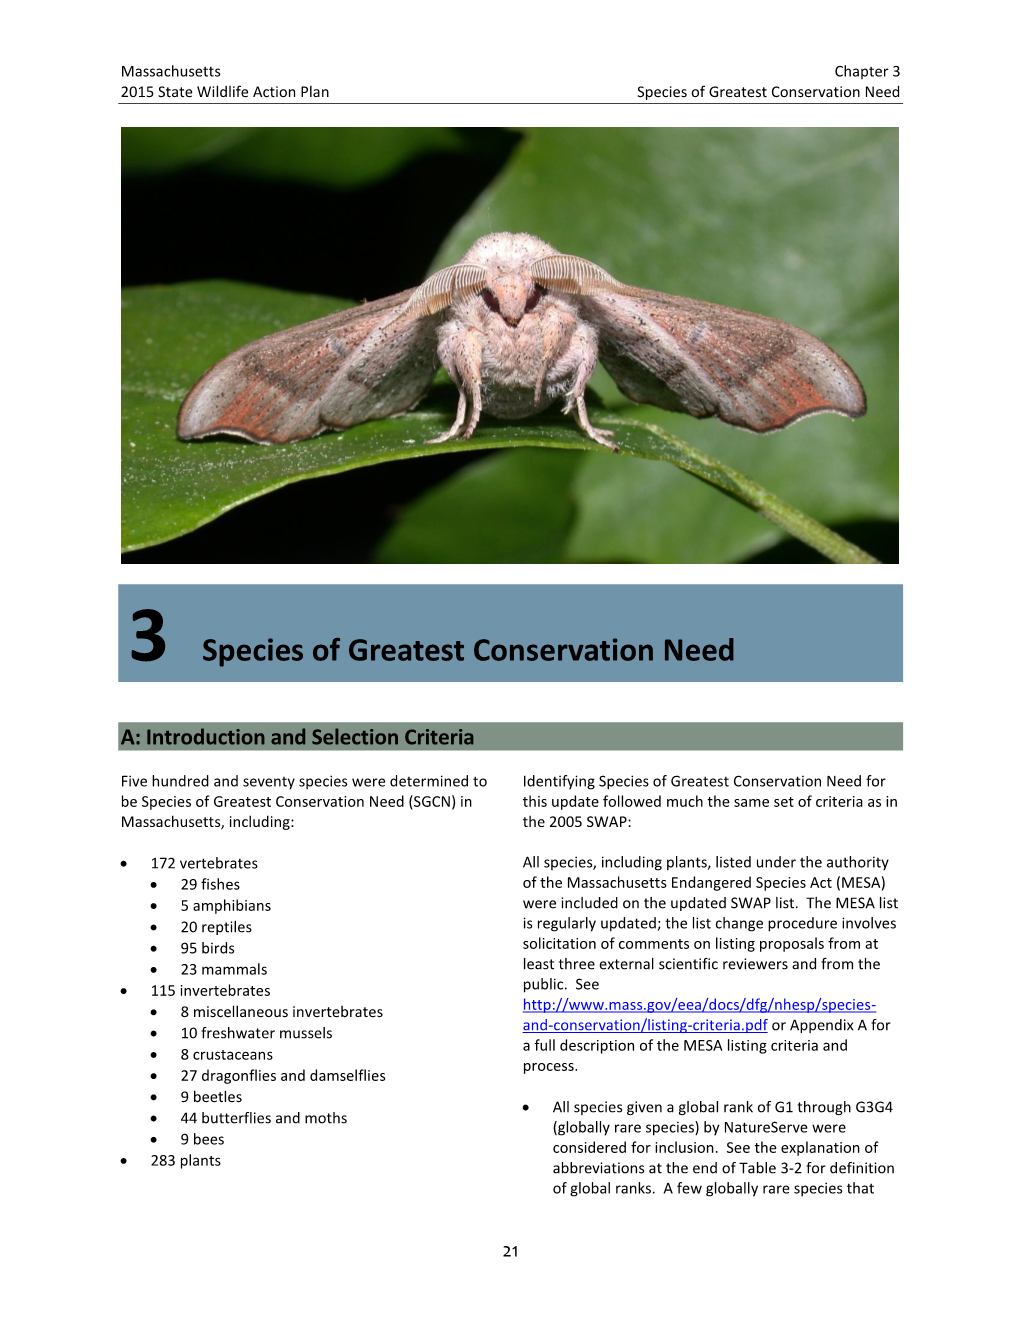 3 Species of Greatest Conservation Need